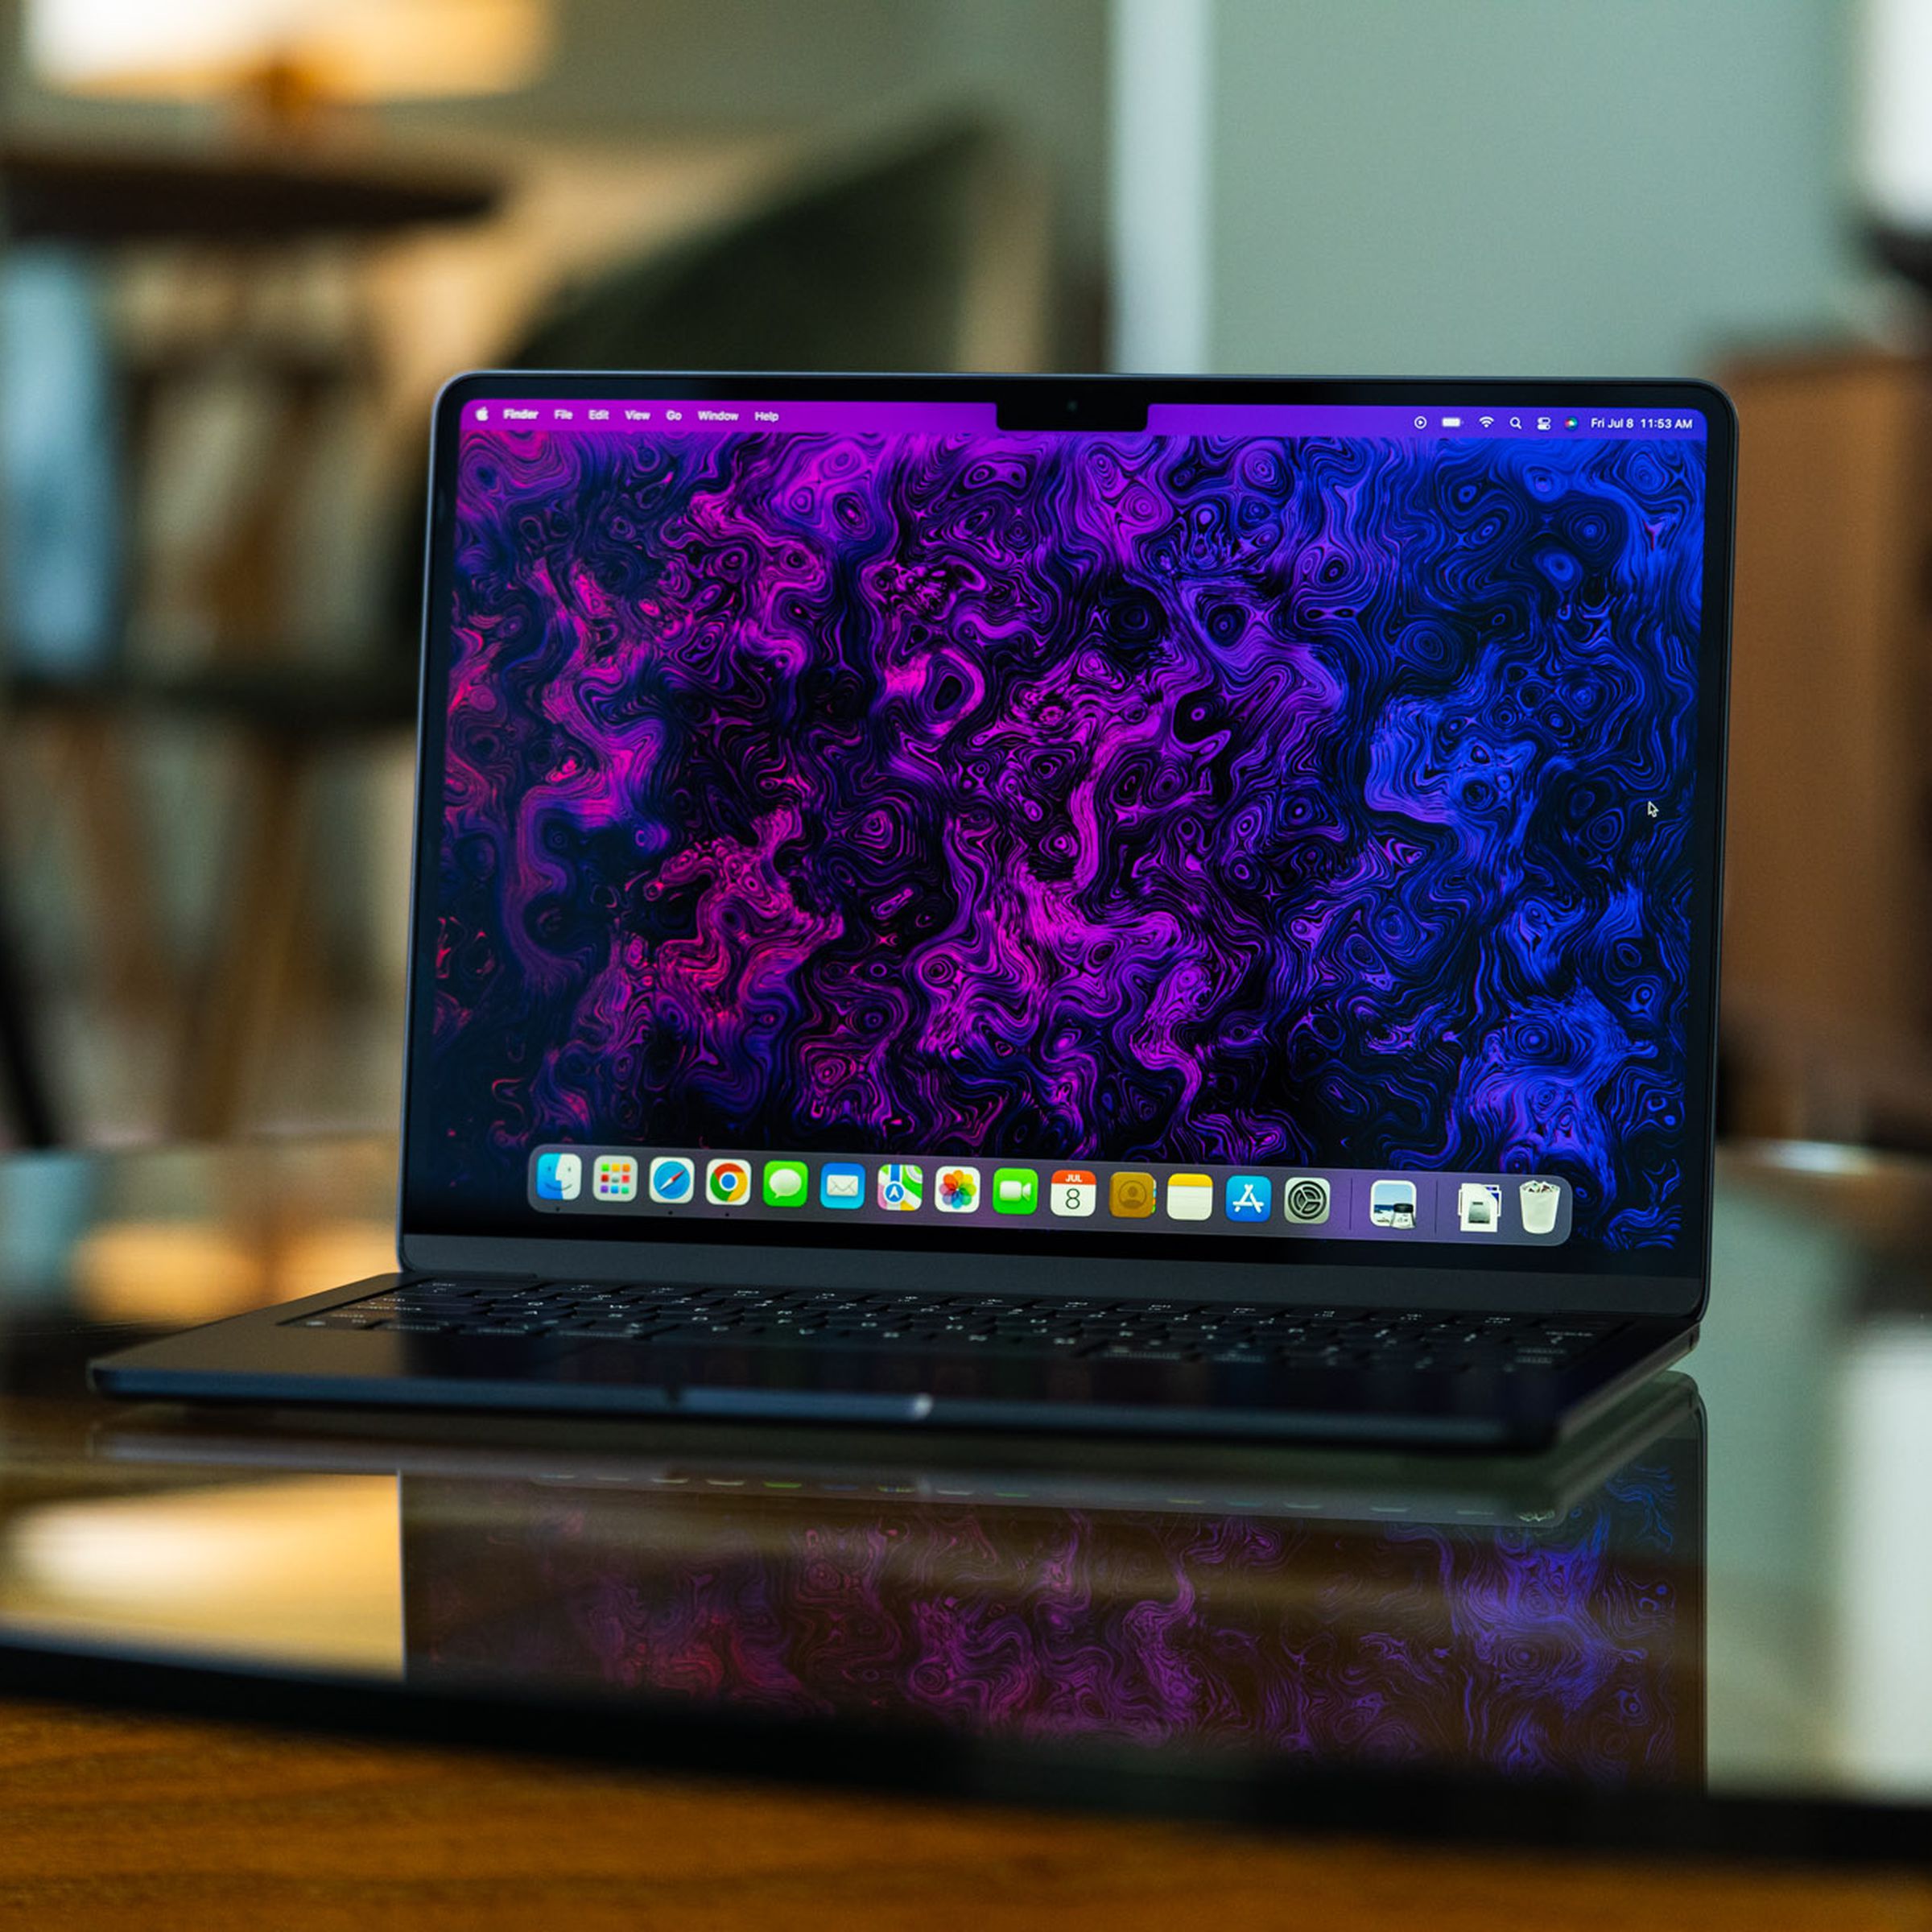 The M2 MacBook Air is opened, facing the camera. Its display is on, showcasing a psychedelic purple and black wallpaper created by The Verge’s art and illustration team.